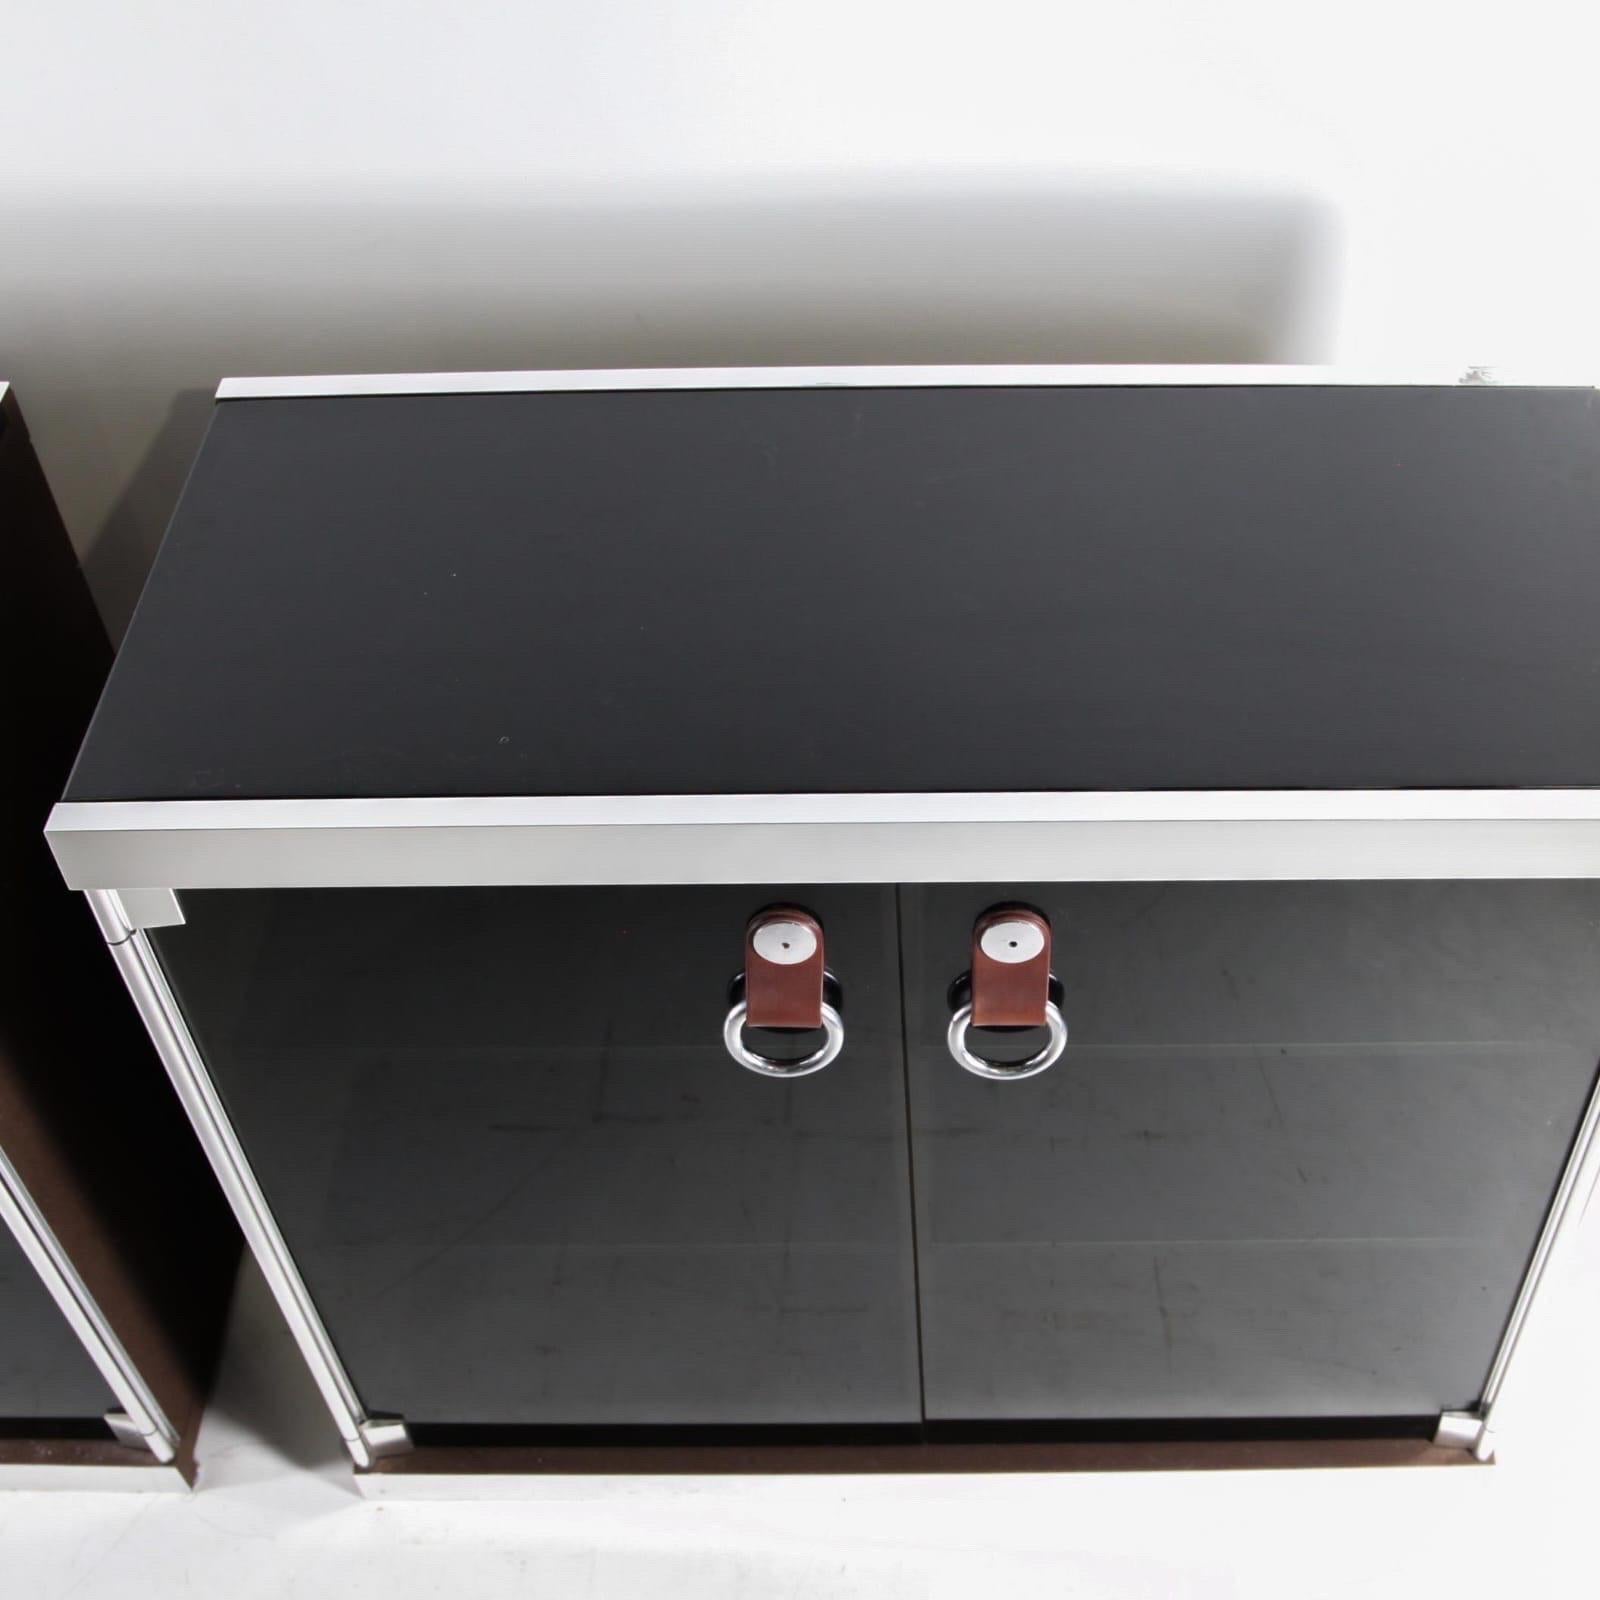 Rare pair of sideboards by Guido Faleschini for Hermès circa 1970.
Made of brown suede, stainless steel, black marble tops and stained glass doors with leather handles. 8 shelves inside. 
Very chic, very good condition. 